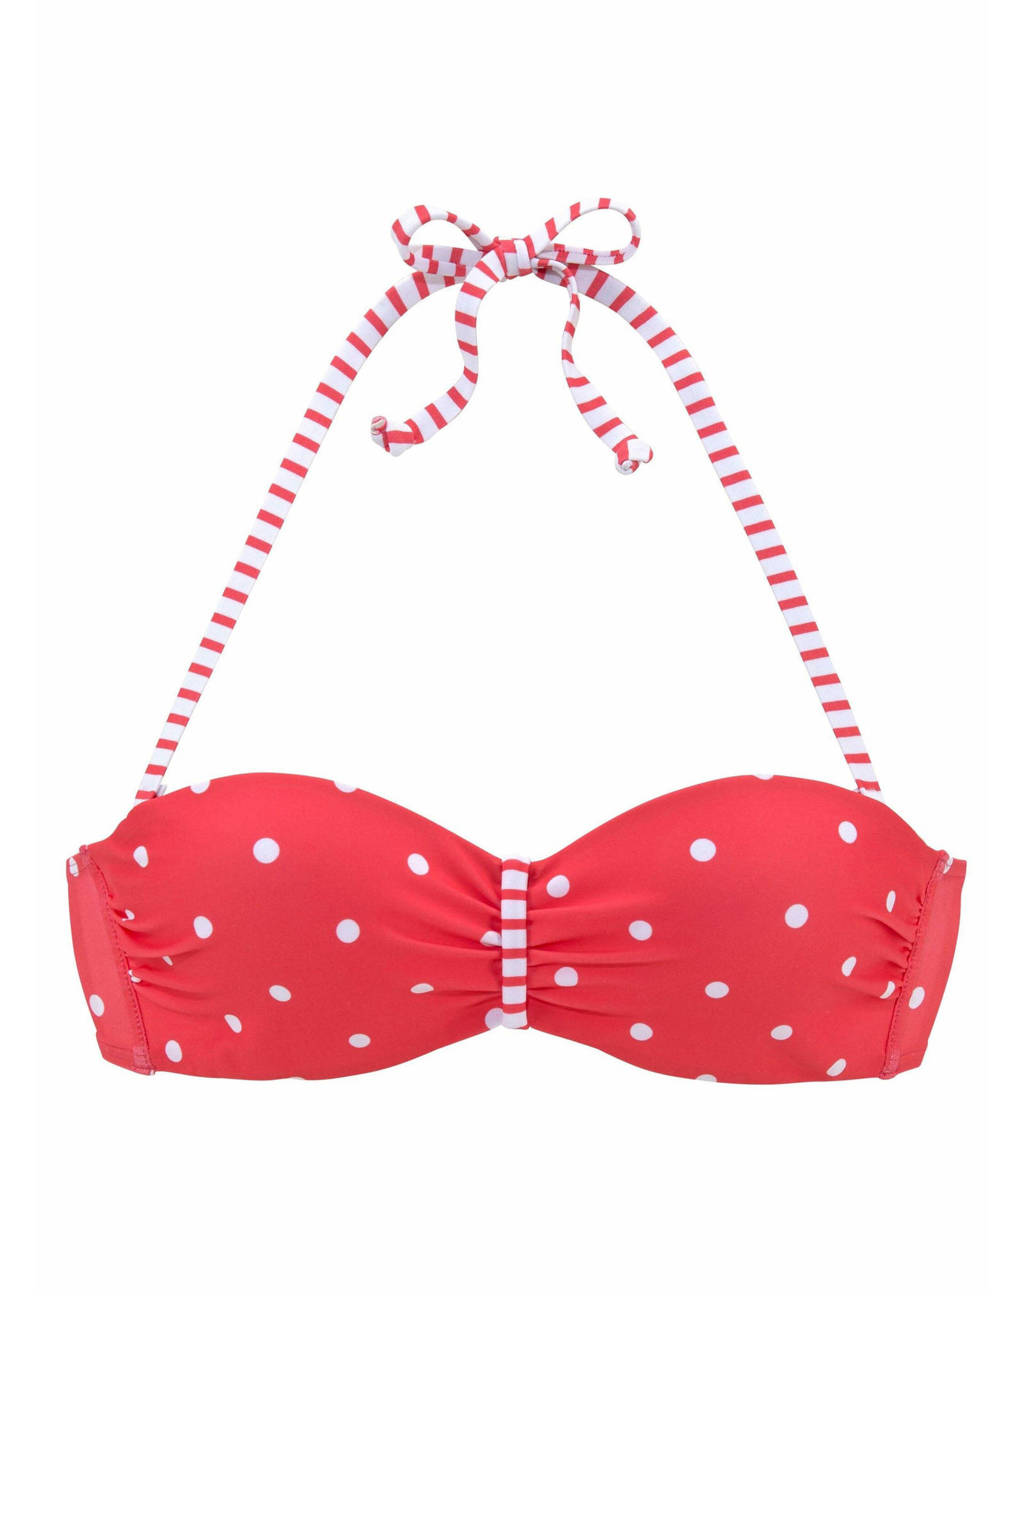 s.Oliver strapless bandeau bikinitop met stippen rood/wit